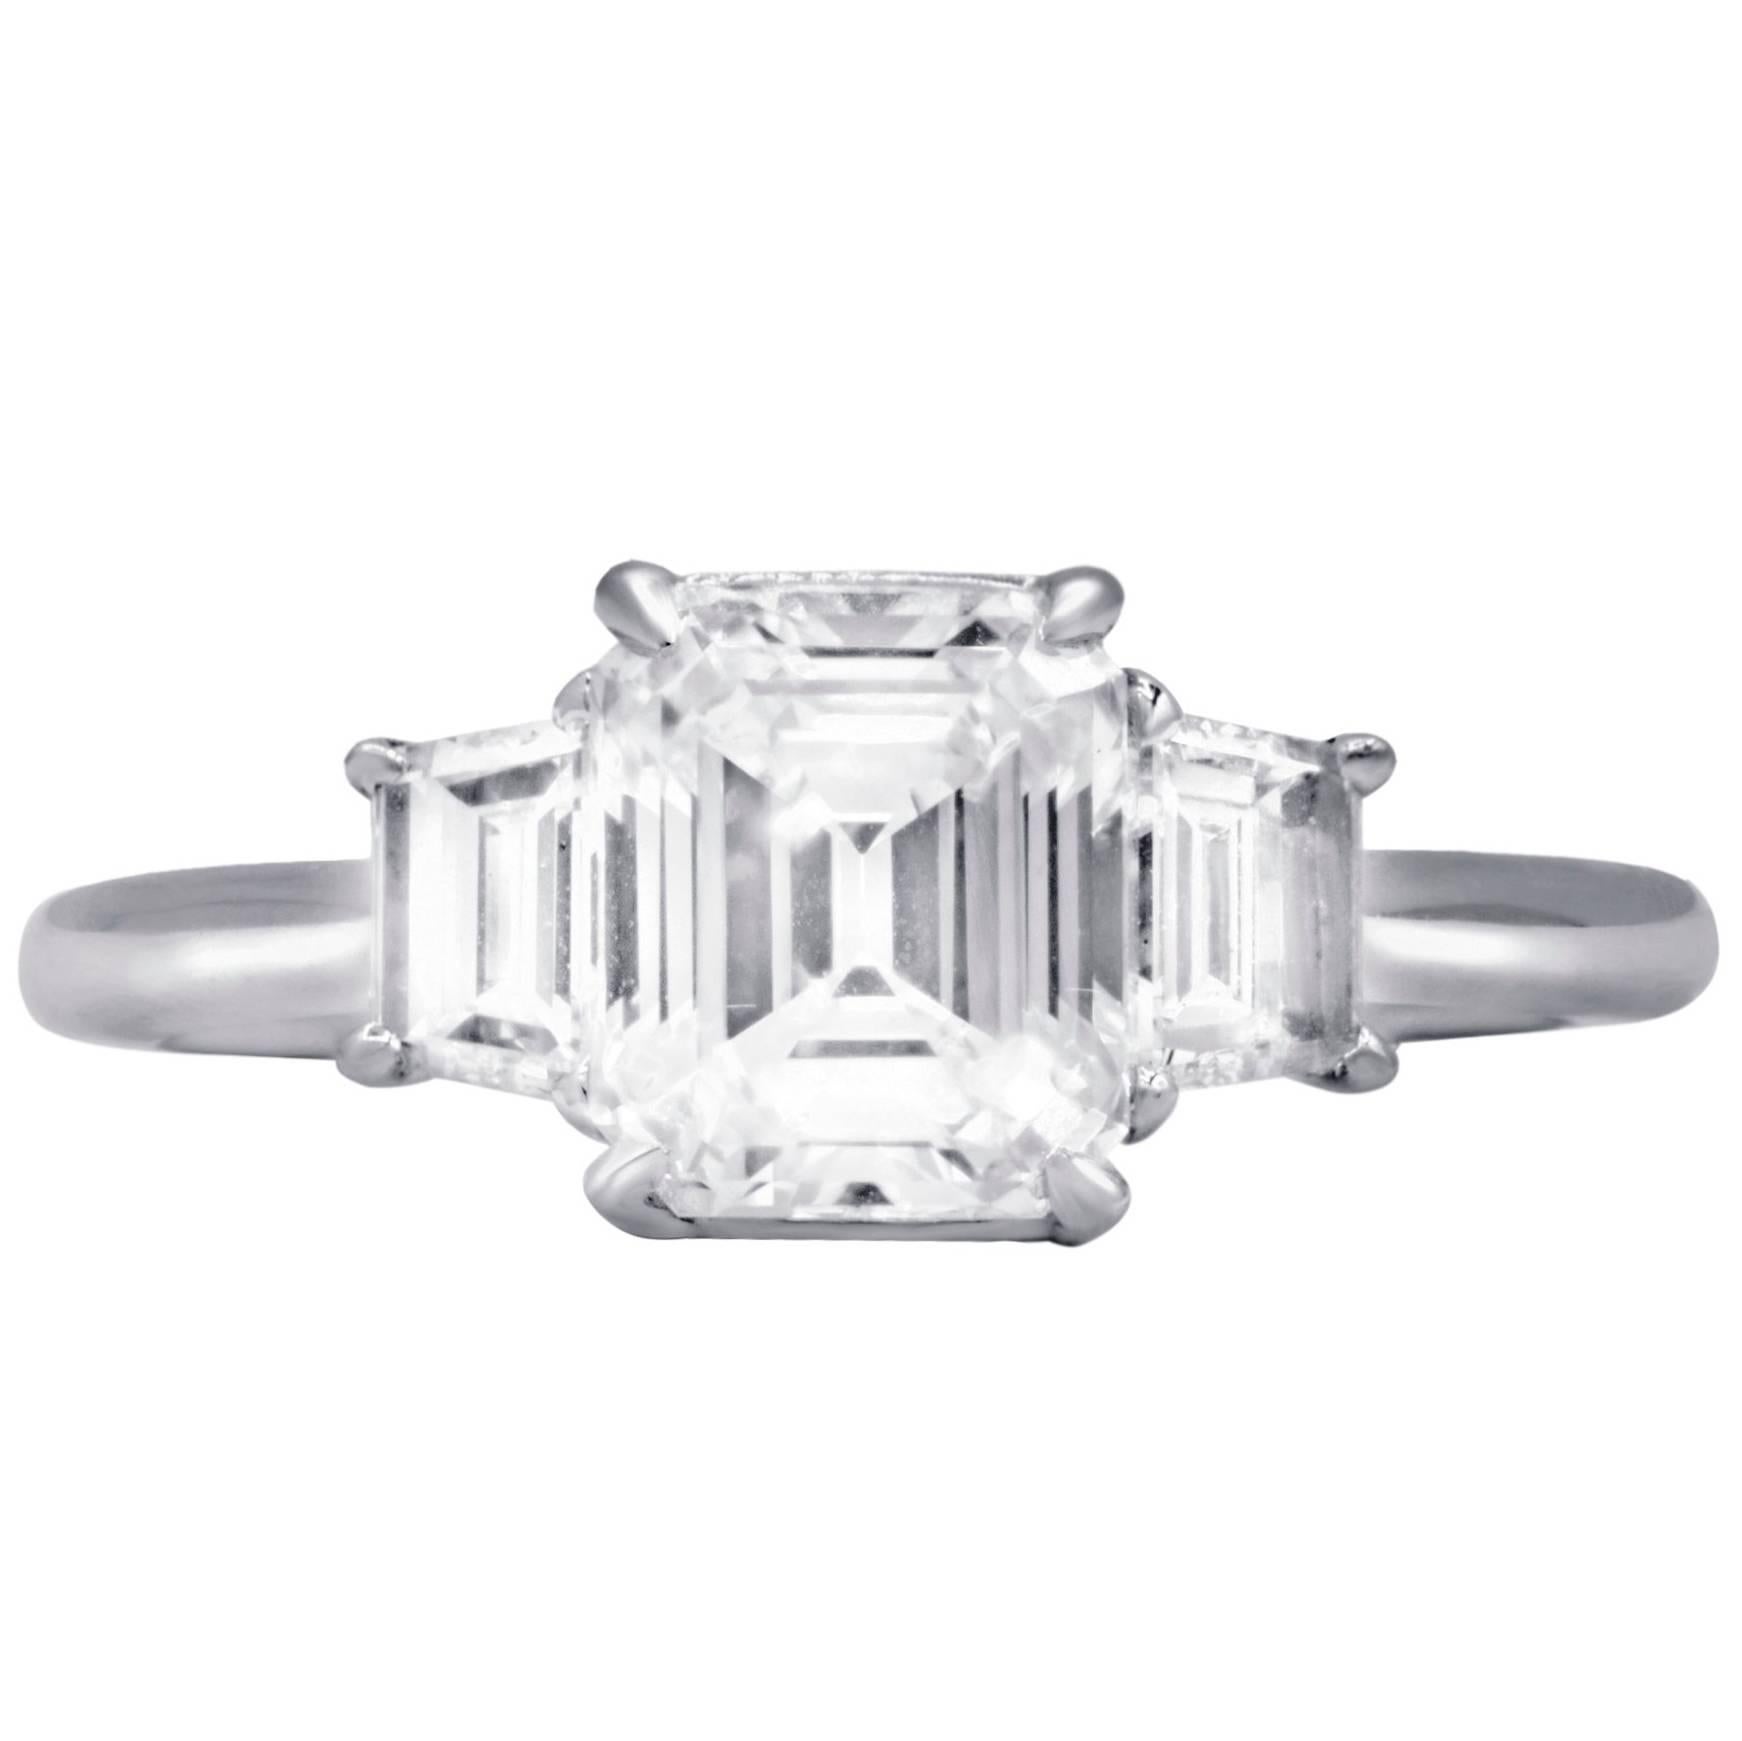 Elegant three stone diamond engagement ring  with  GIA certified emerald cut diamond in the center,weighing 1,75 cts E color/VS1 clarity set with two additional side emerald cut diamonds with total weight 0.64 cts.The mounting is platinum.

•